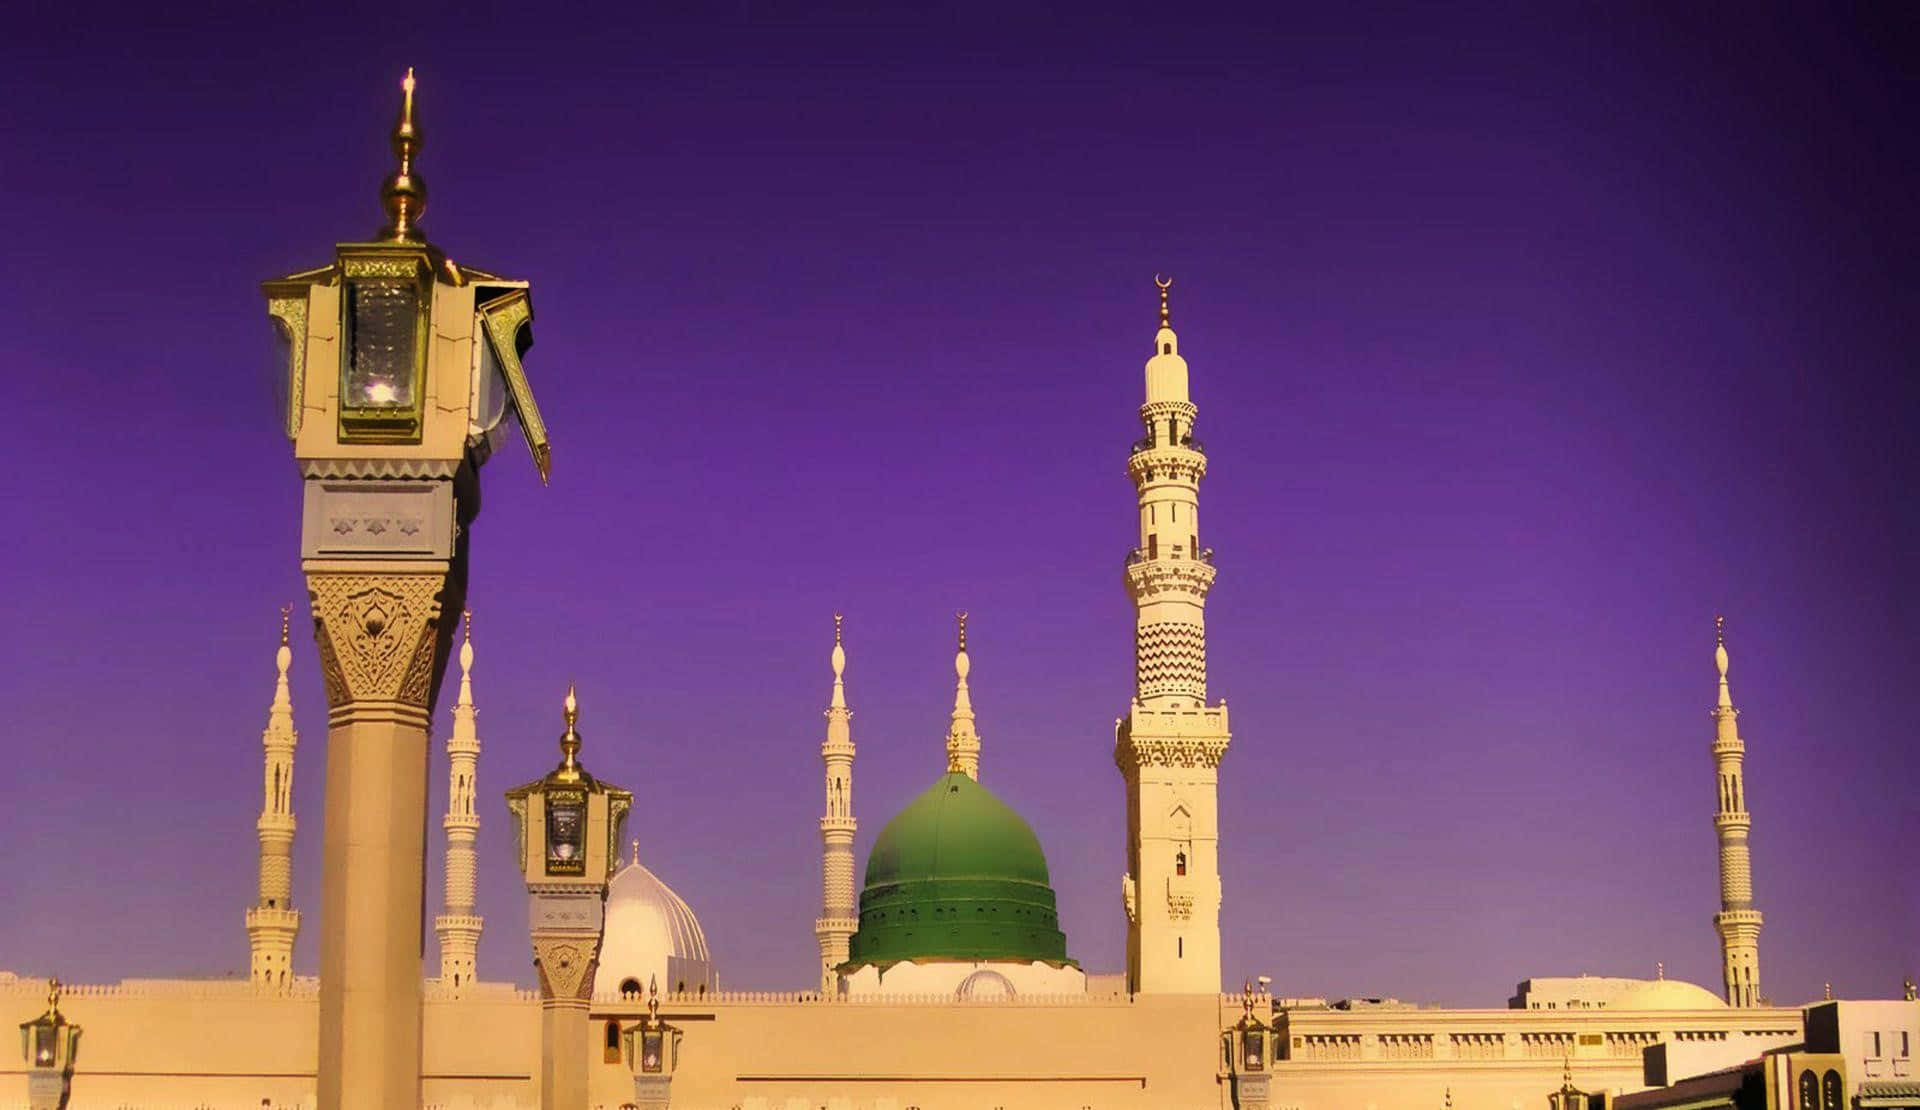 The iconic view of medina cityscape